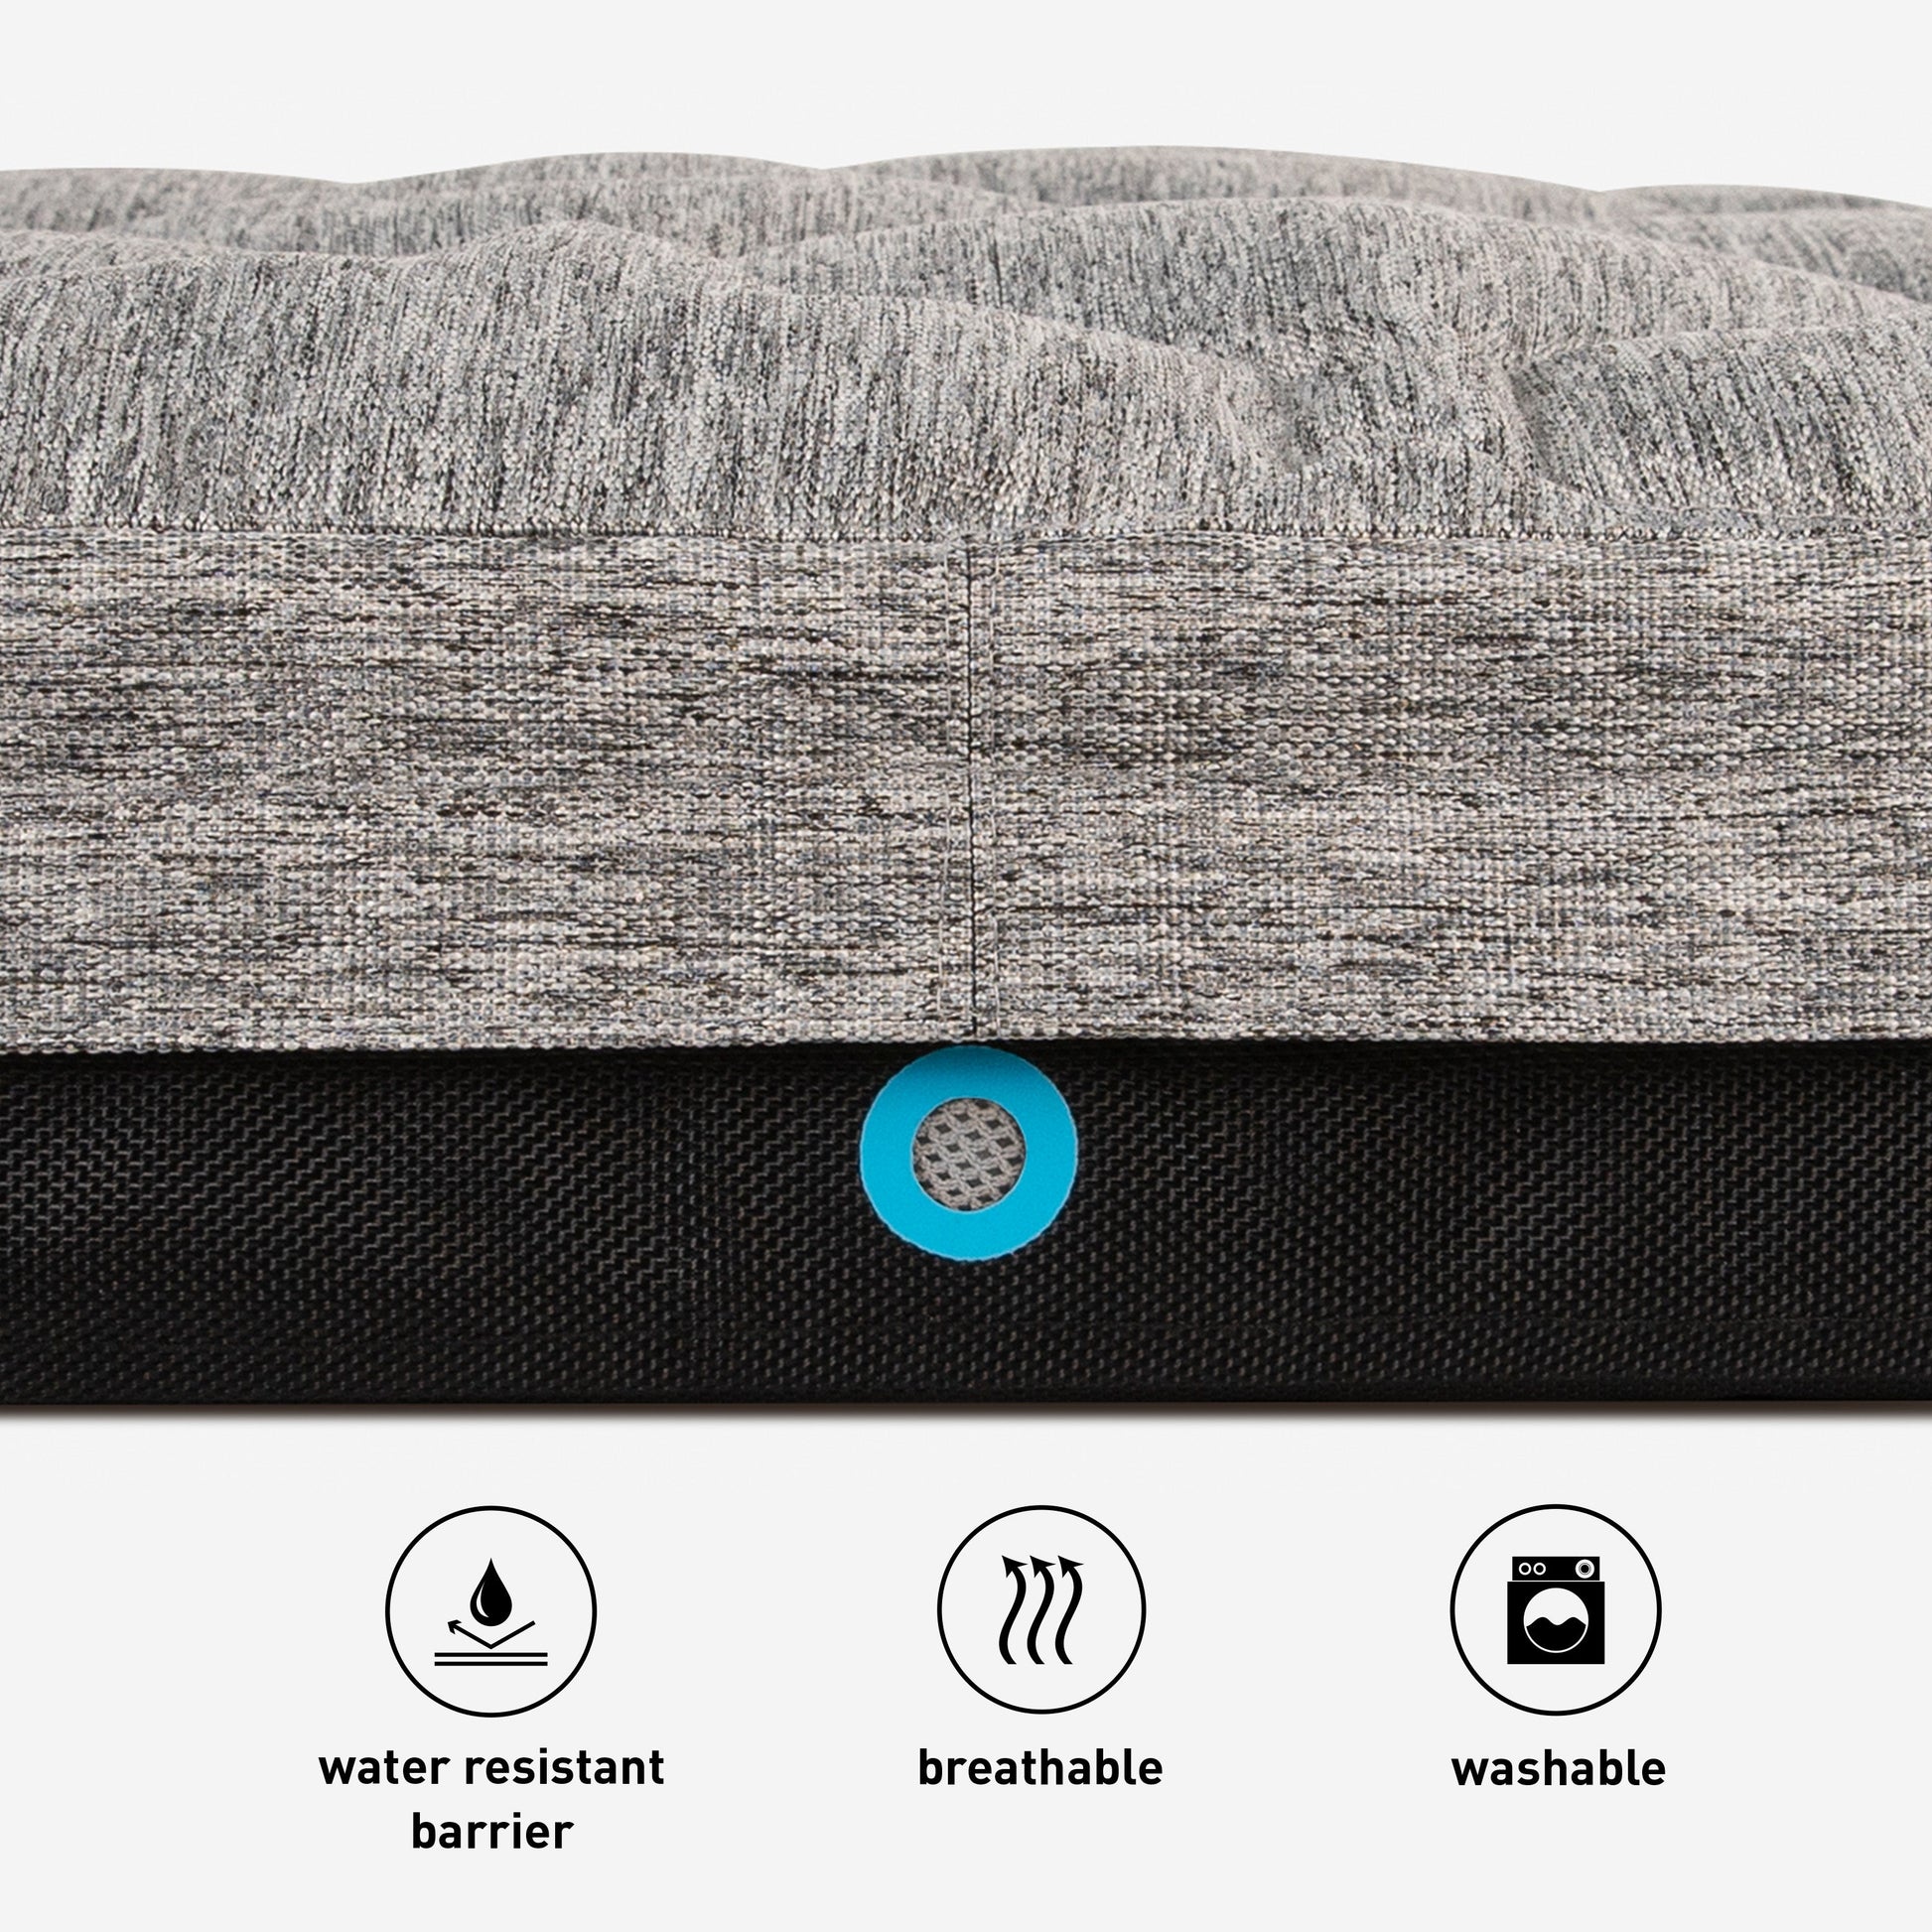 Bedgear Performance Dog Bed water resistant, breathable, and washable features